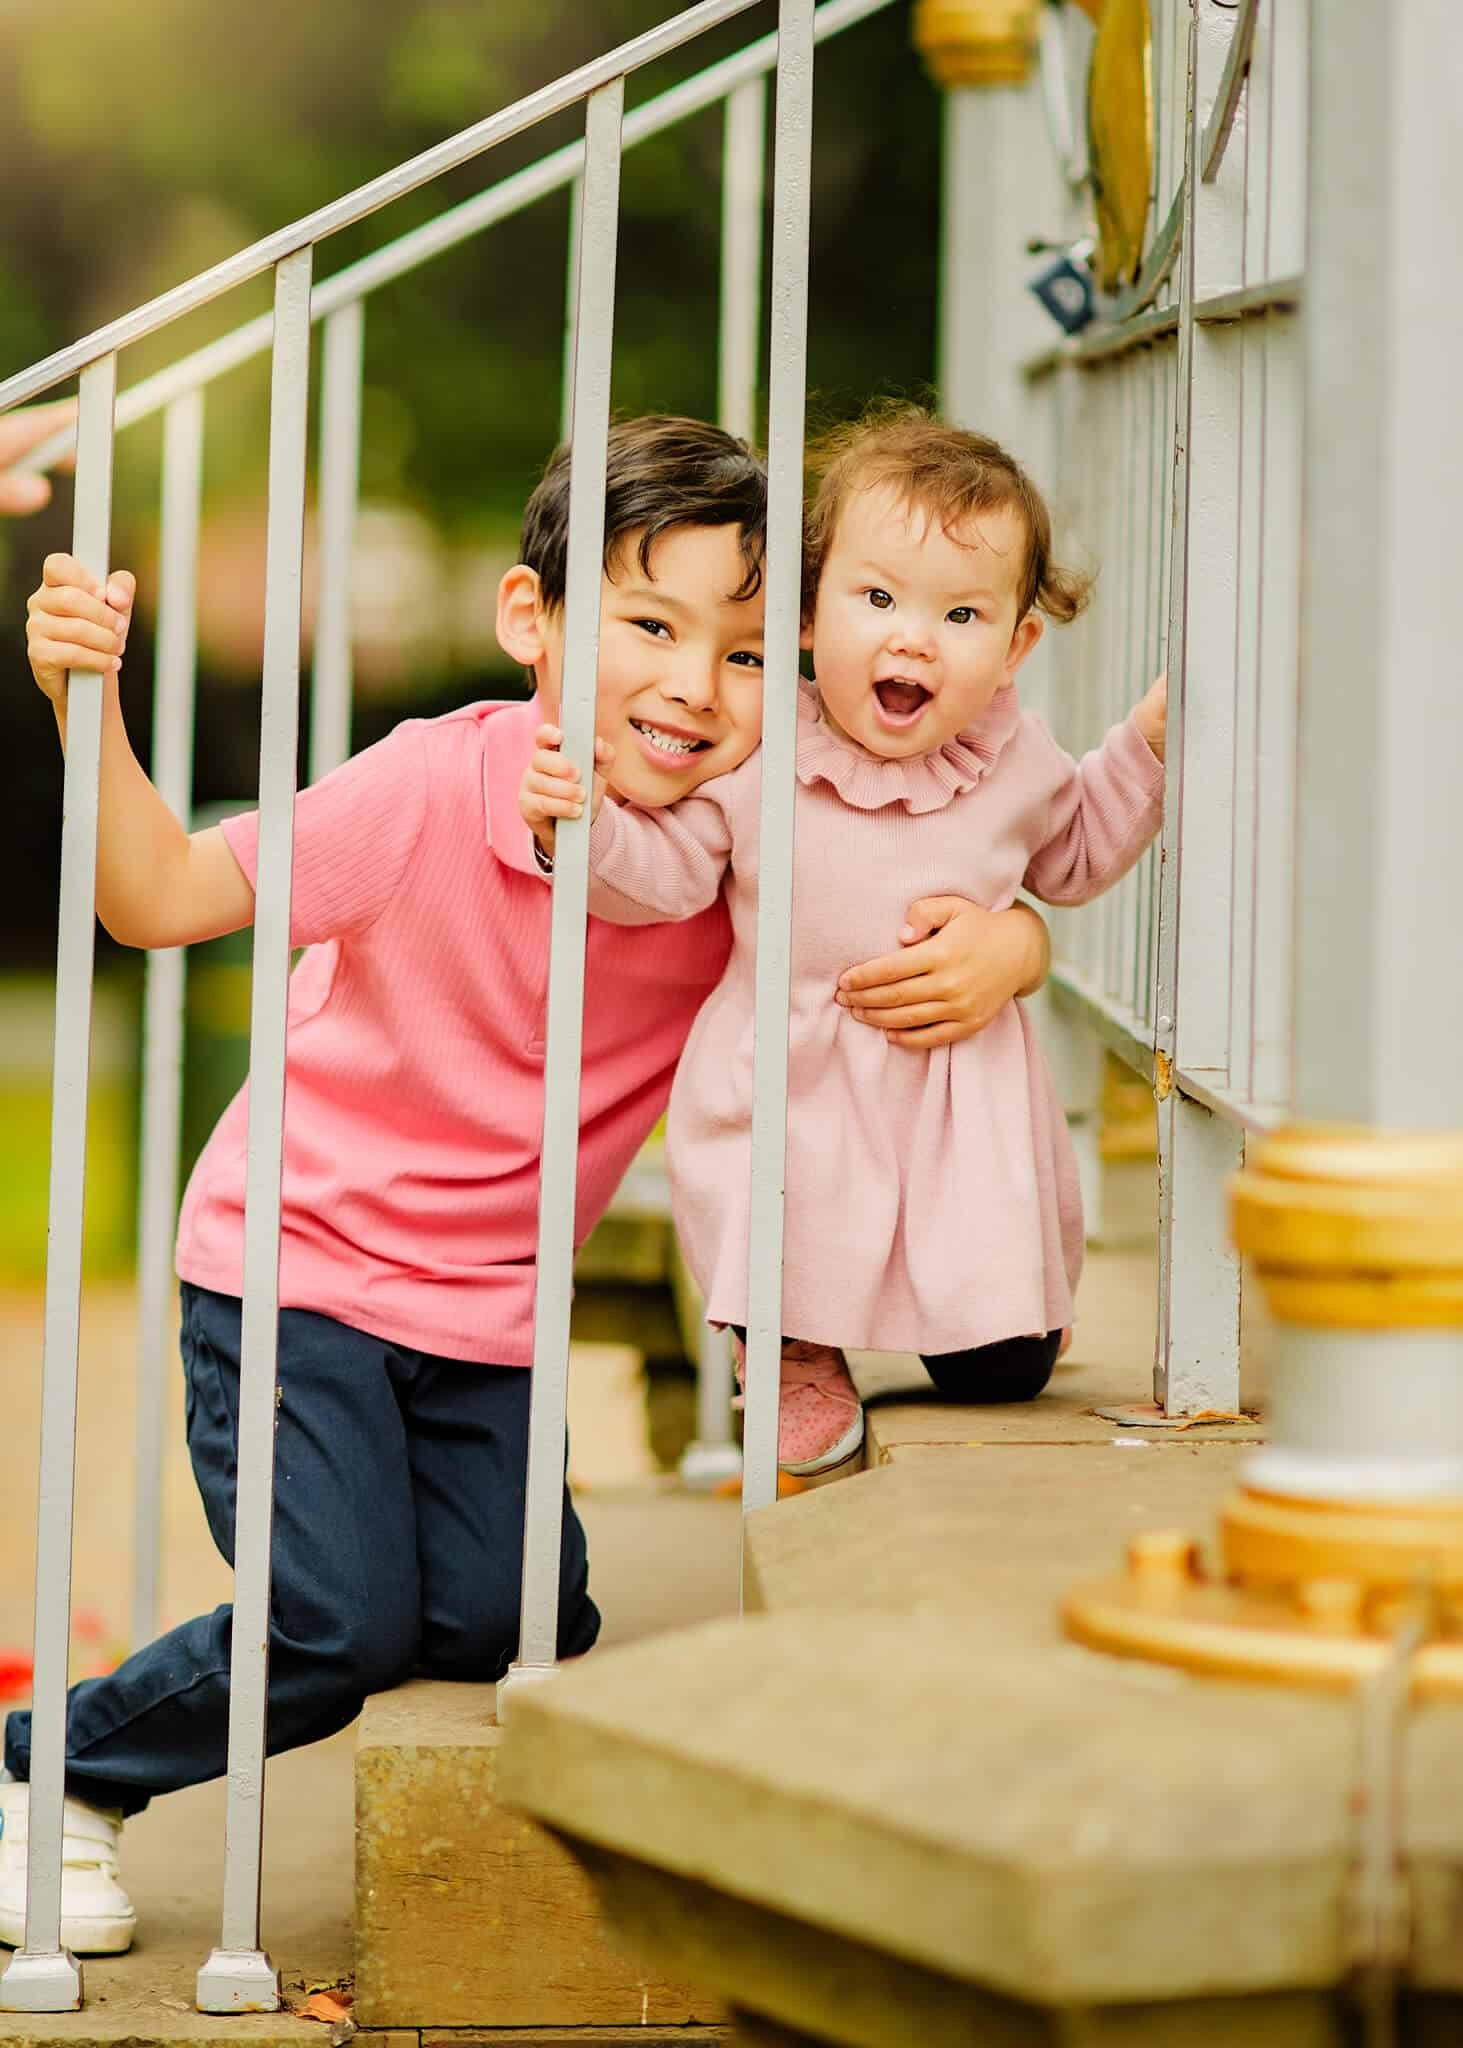 Two joyful children, a boy and a girl in coordinating pink outfits, playfully peek through white metal railings on a wooden porch, radiating happiness and sibling love.